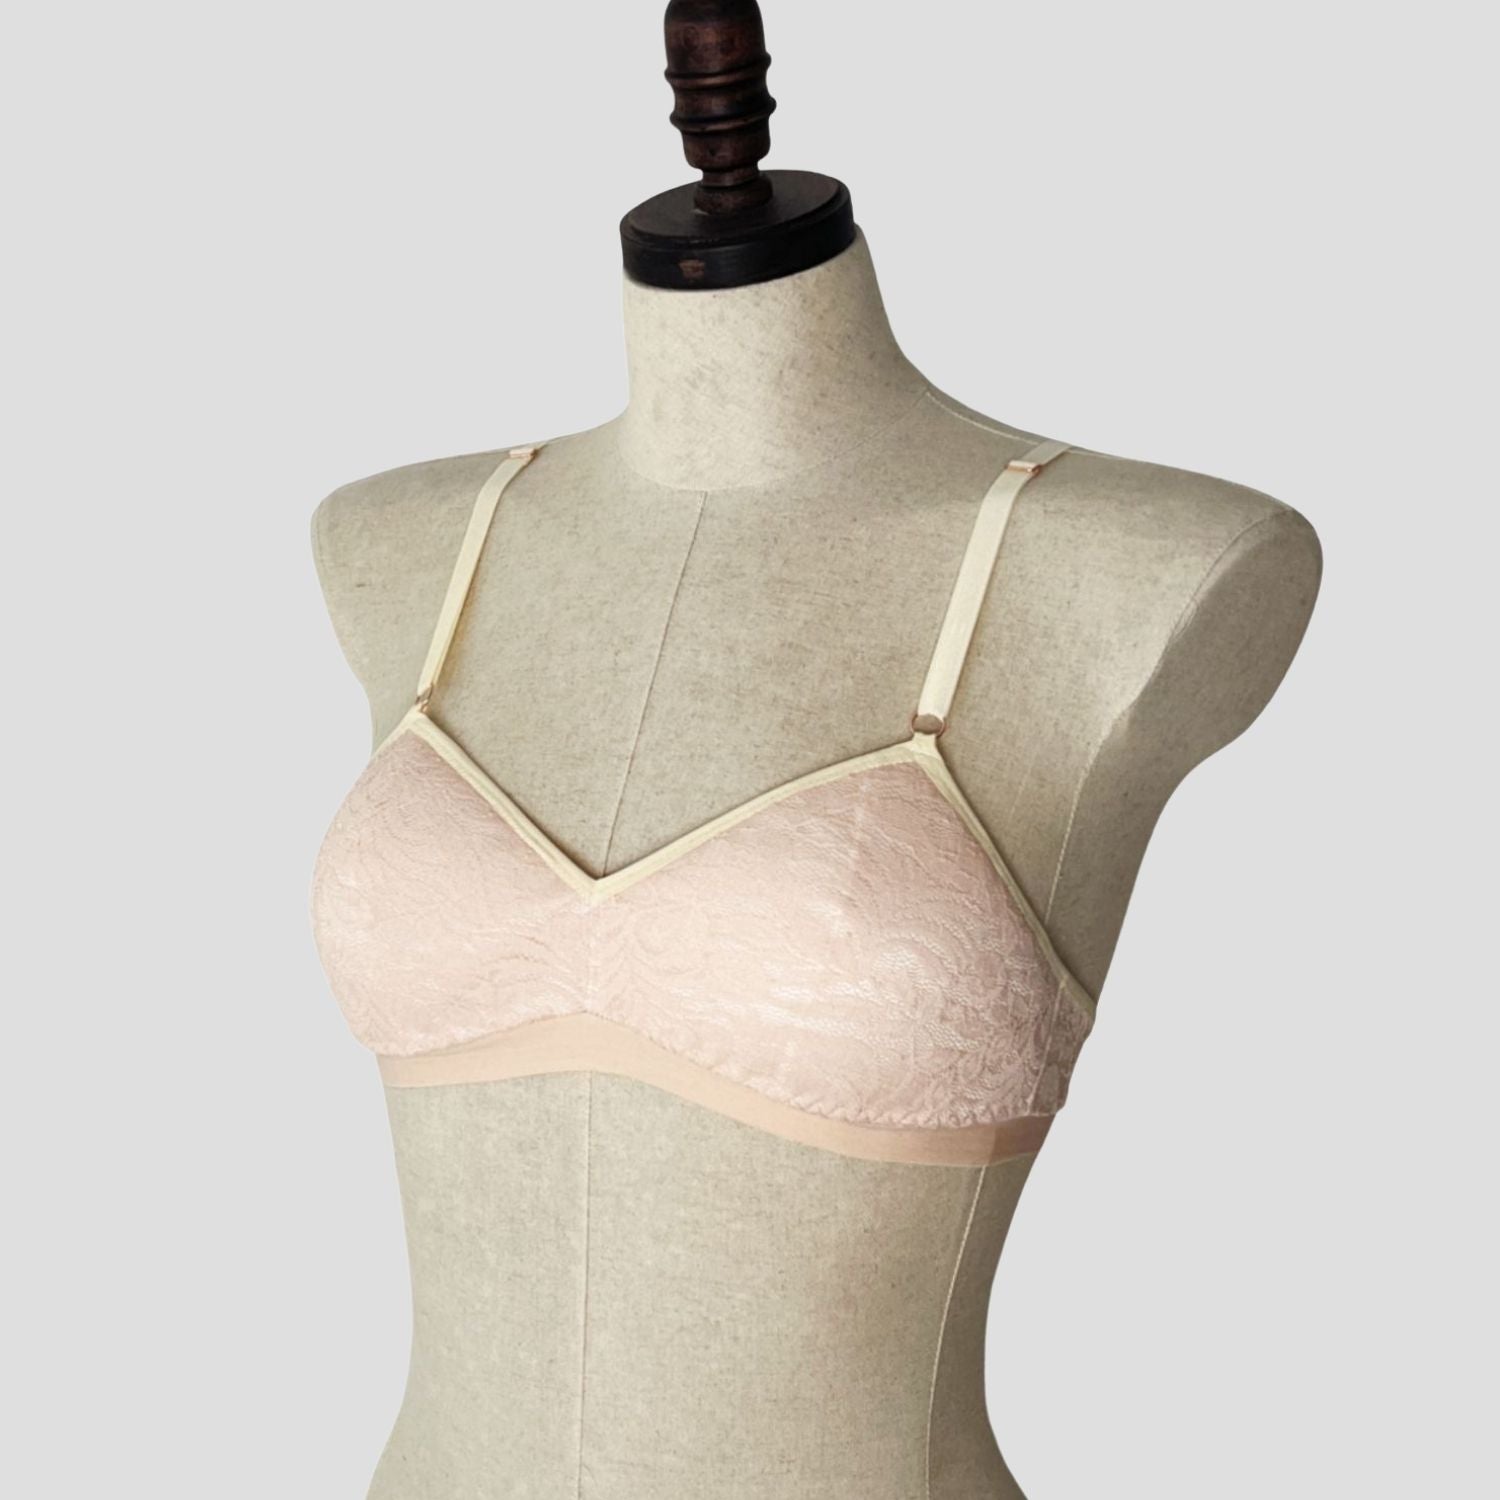 Peach lace padded bra  Shop organic cotton lingerie made in